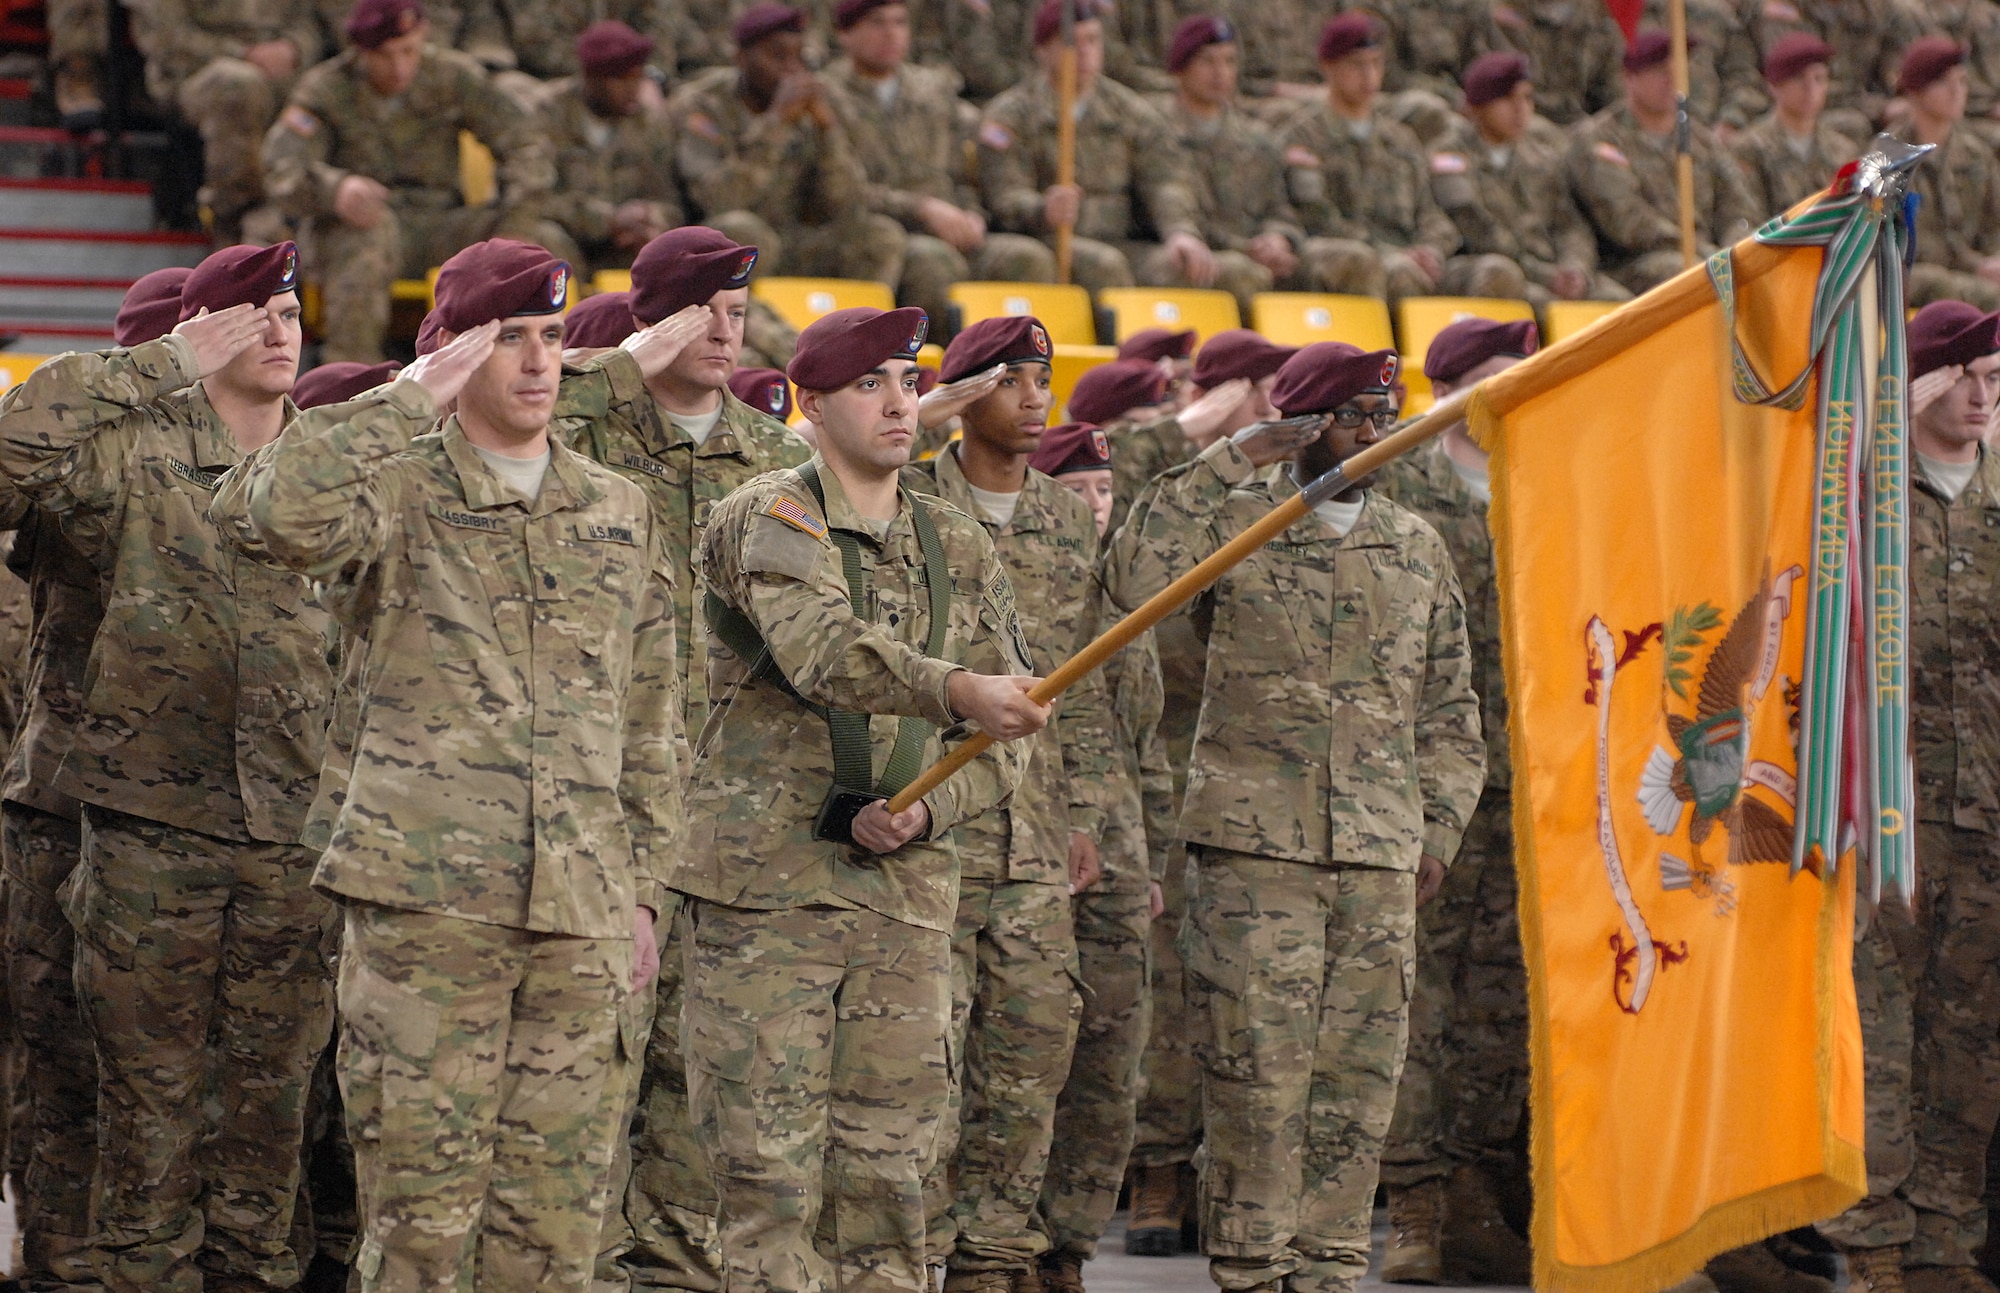 Soldiers of the 1st Squadron (Airborne), 40th Cavalry Regiment, salute during the national anthem at the 4th Brigade Combat Team (Airborne), 25th Infantry Division's deployment ceremony at Sullivan Arena, Anchorage, Alaska, Nov. 29, 2011.  The 4-25th ABCT, "Spartan Brigade," will deploy 3,500 Soldiers on a series of flights in November and December en route to Afghanistan. (U.S. Air Force photo/Staff Sgt. Zachary Wolf)